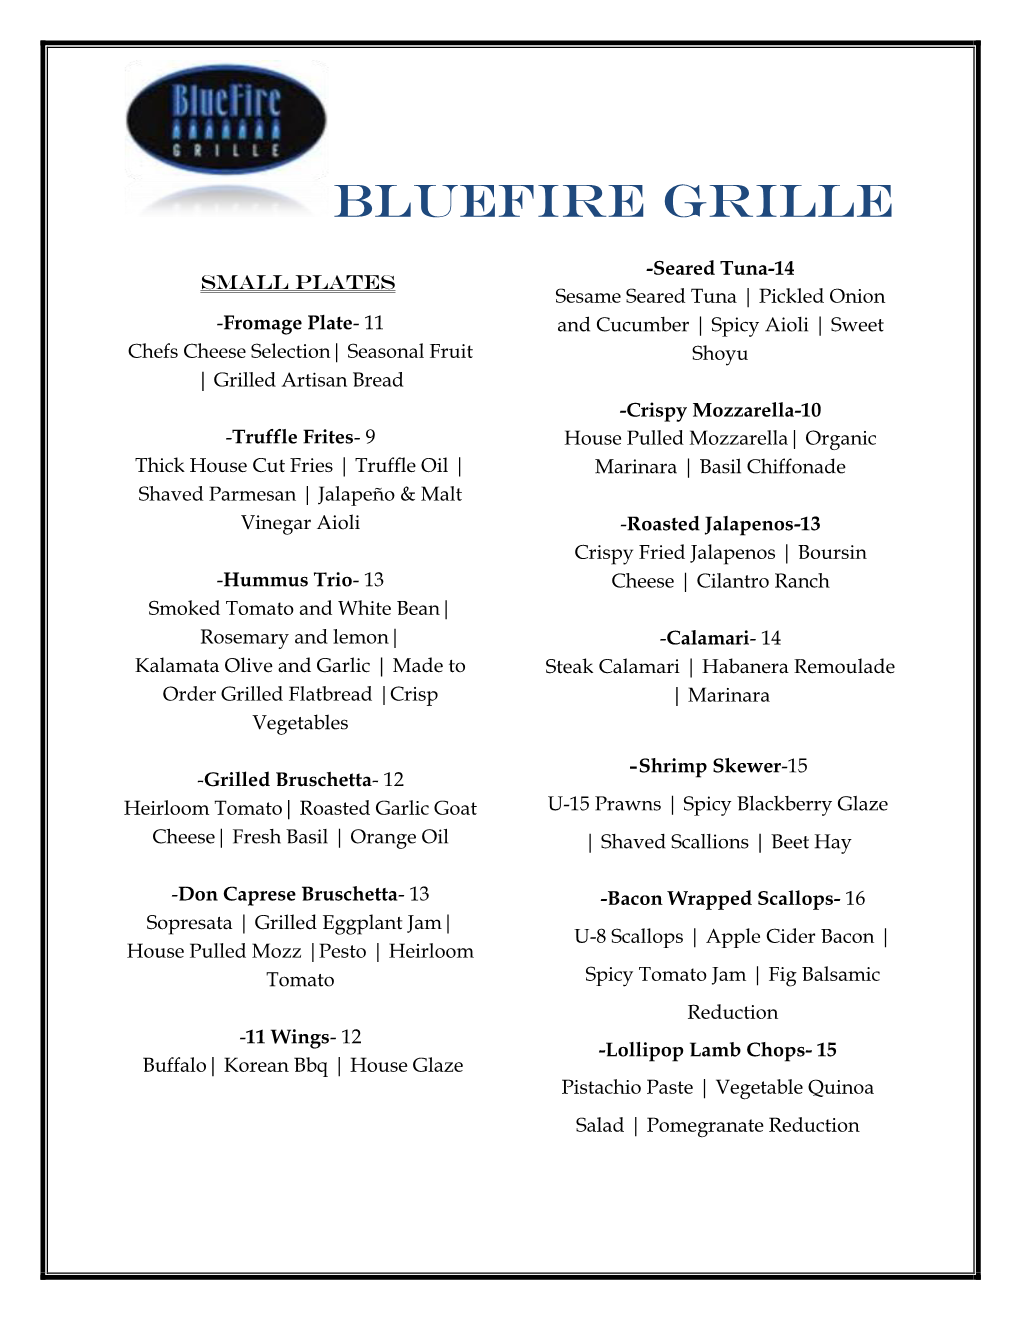 Bluefire Grille